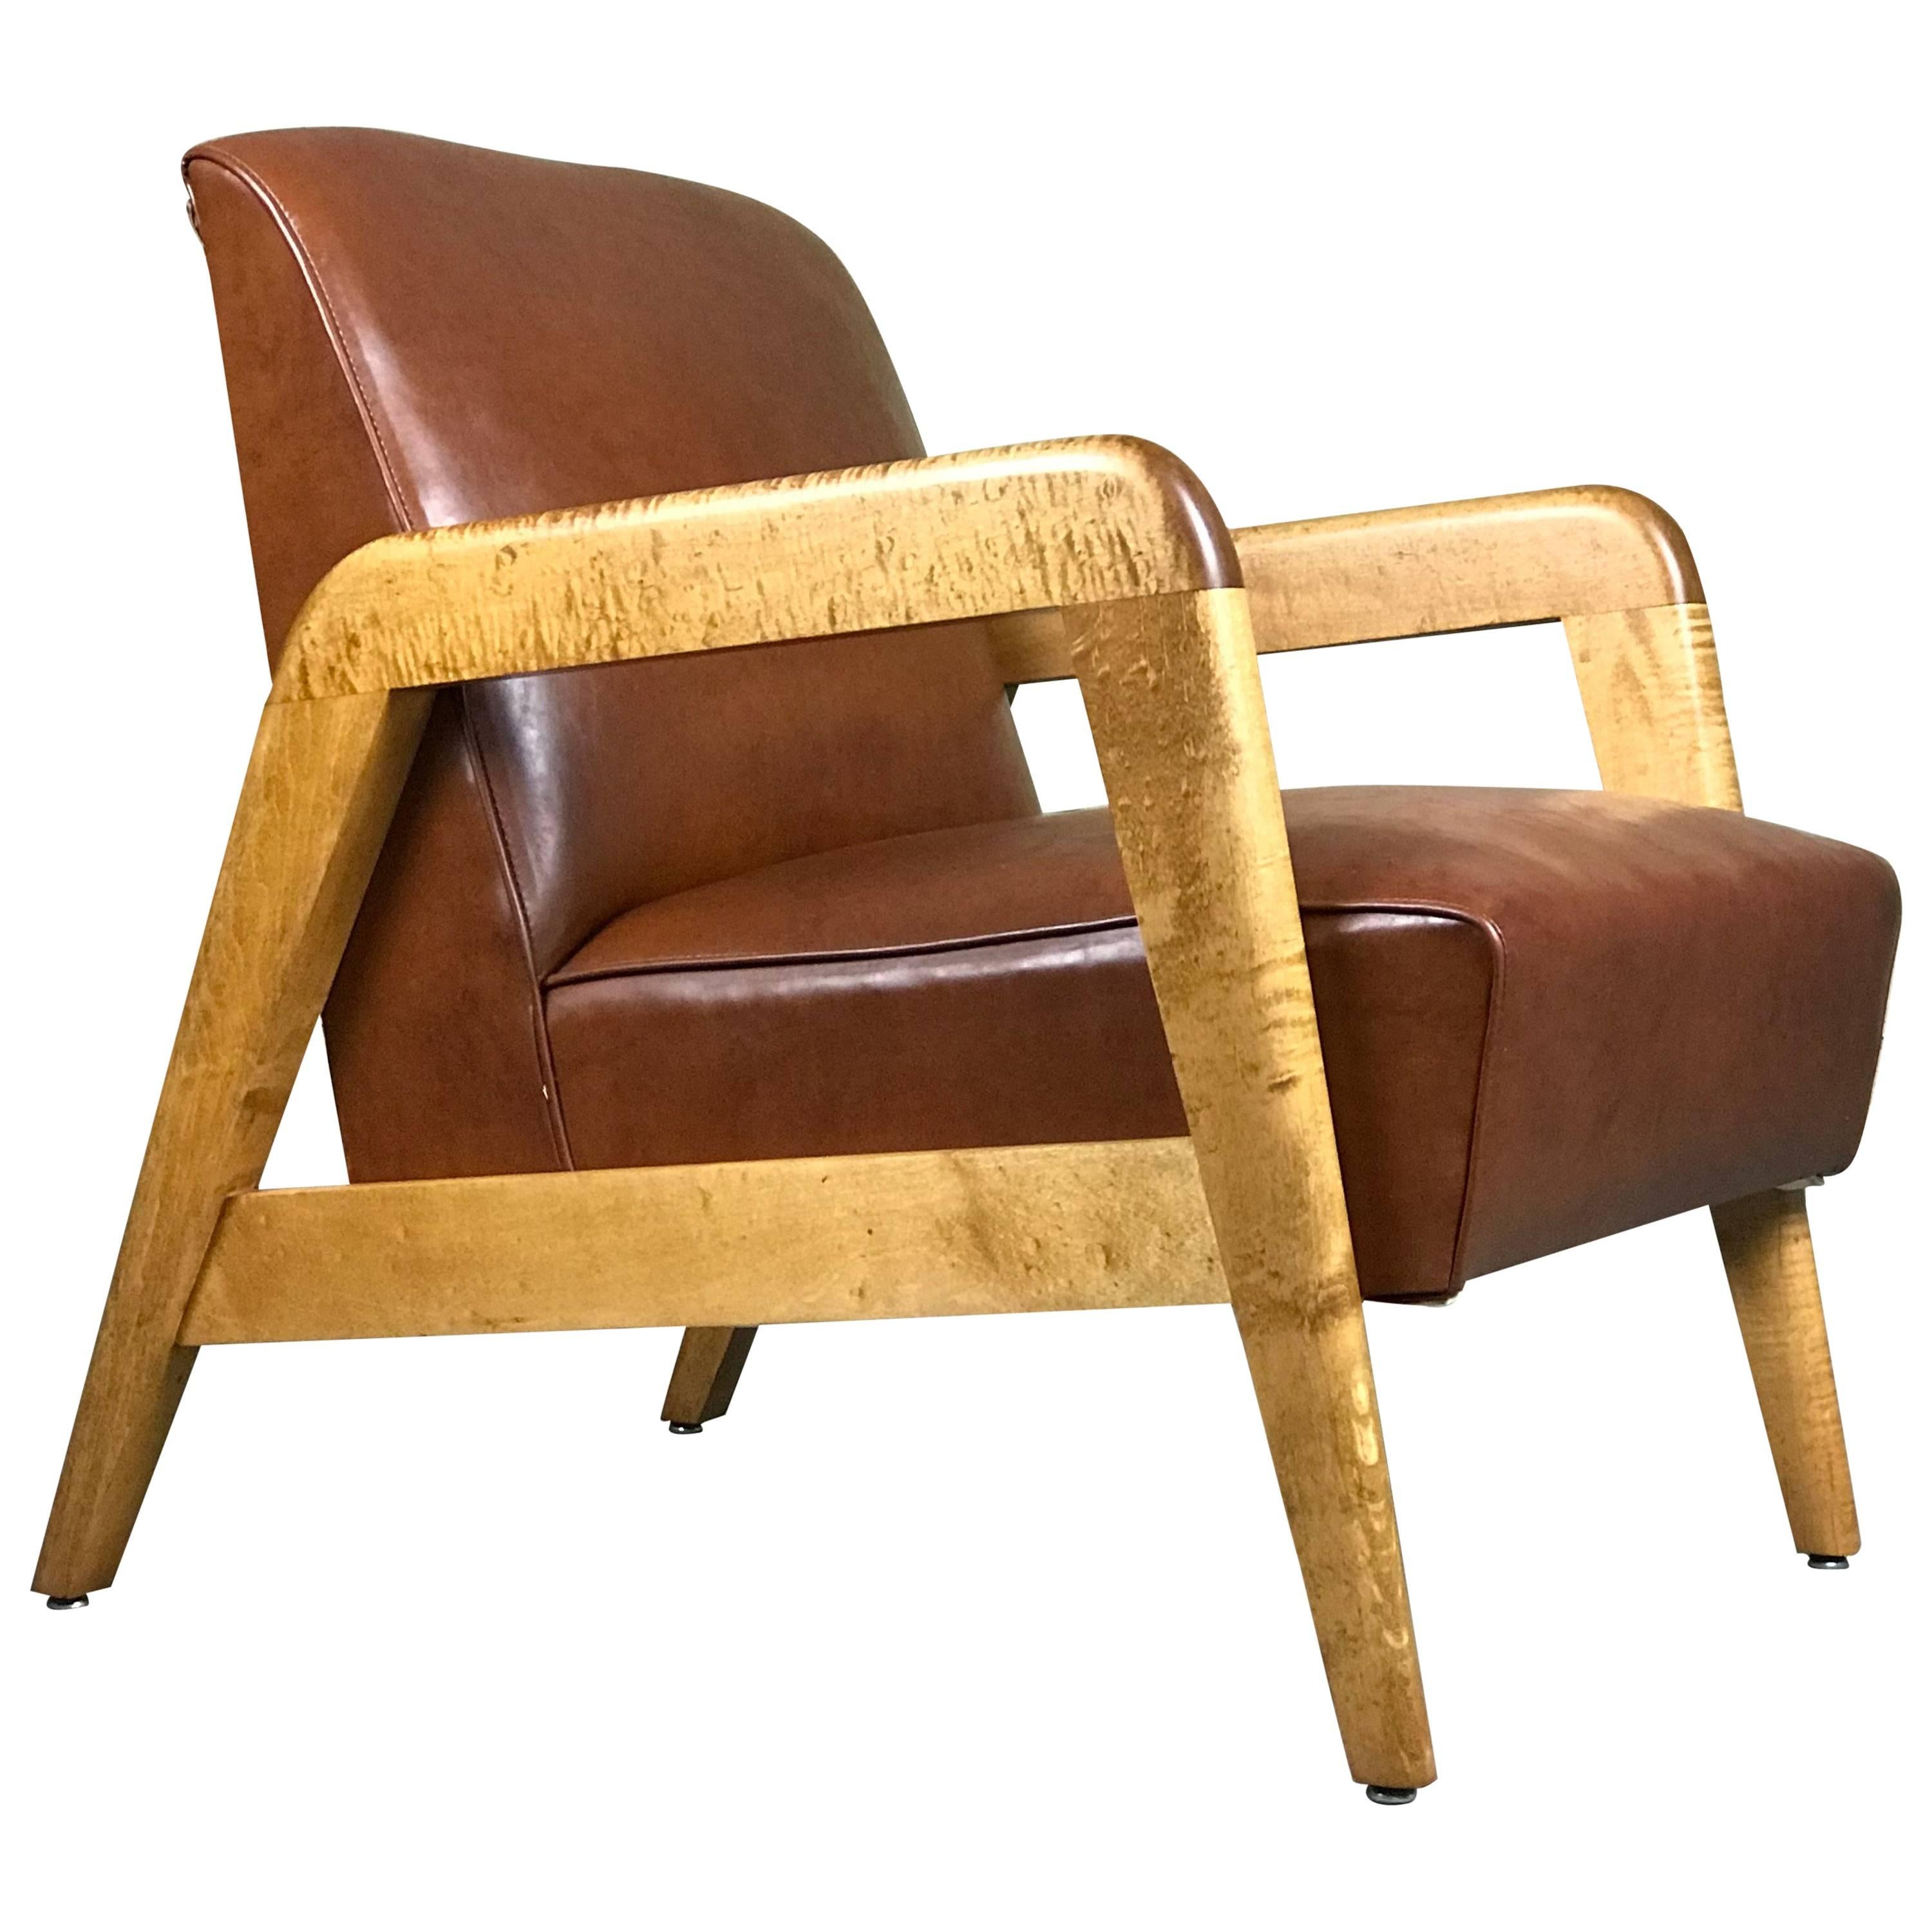 Early Mid-Century Modern Lounge Chair by Russel Wright for Thonet 